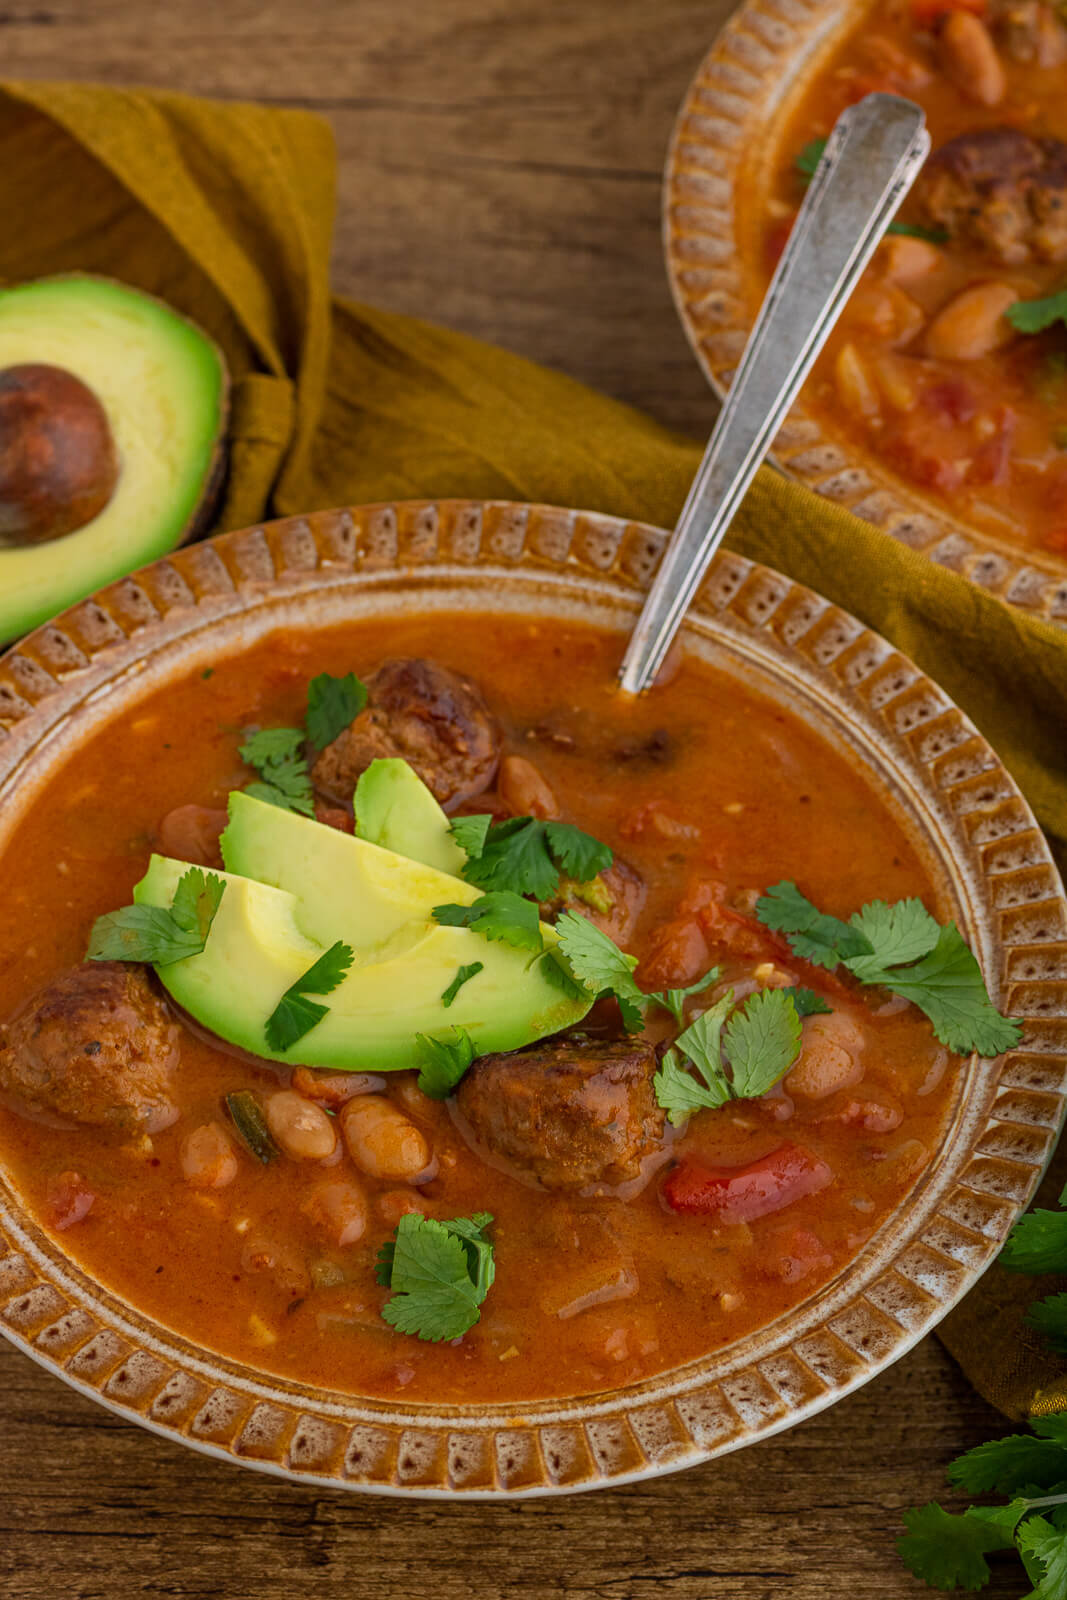 An inviting bowl of spicy Pinto Bean Soup garnished with sliced avocado and fresh cilantro.